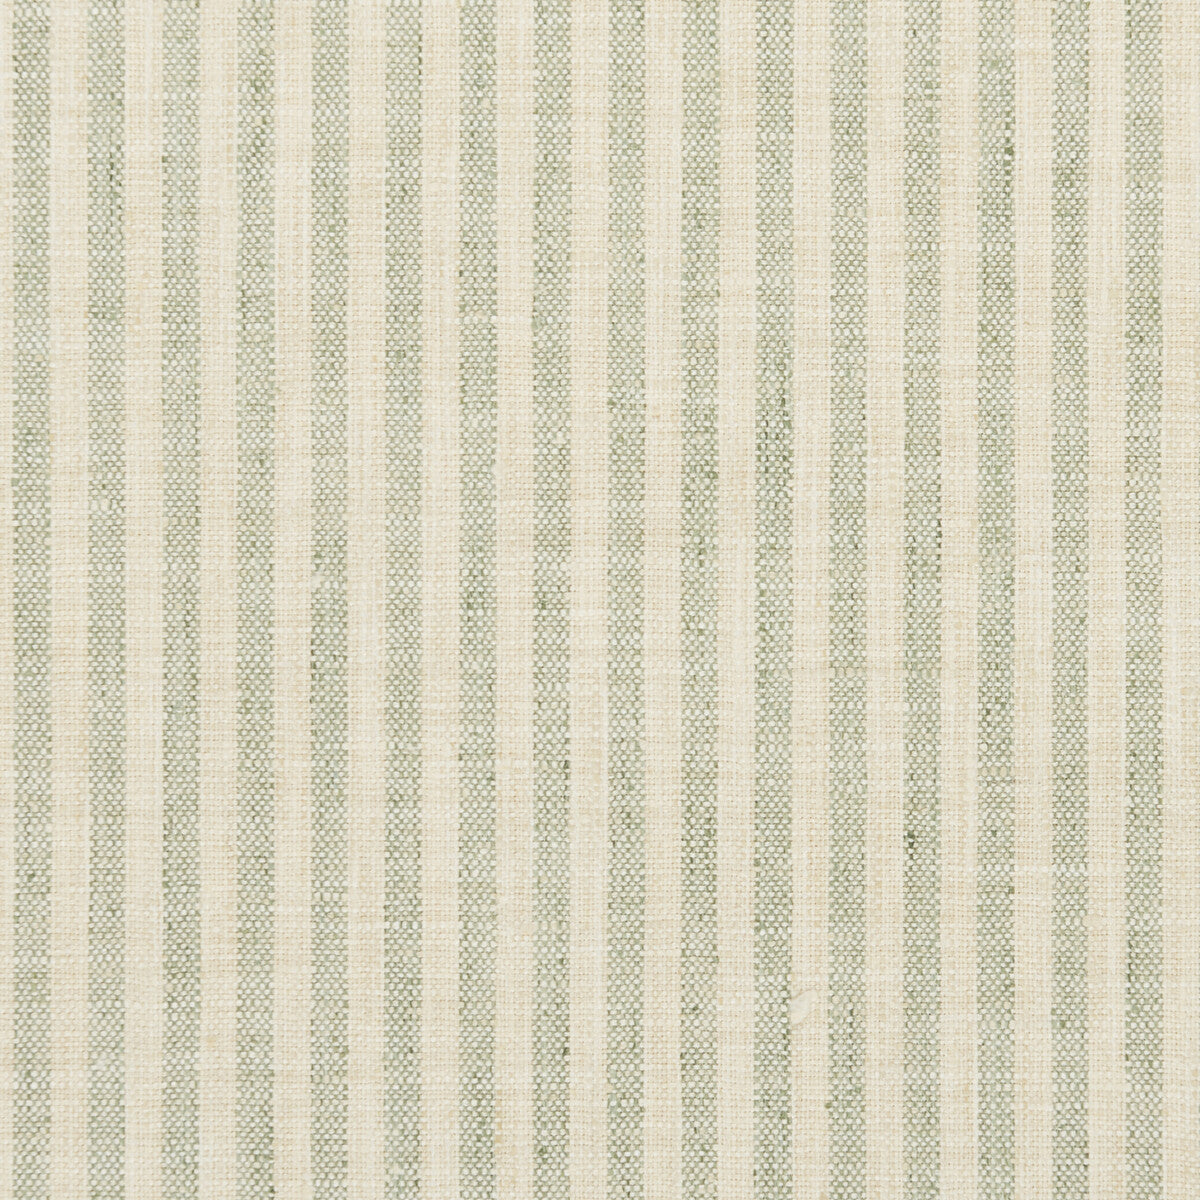 Kravet Basics fabric in 34080-123 color - pattern 34080.123.0 - by Kravet Basics in the Bungalow Chic II collection